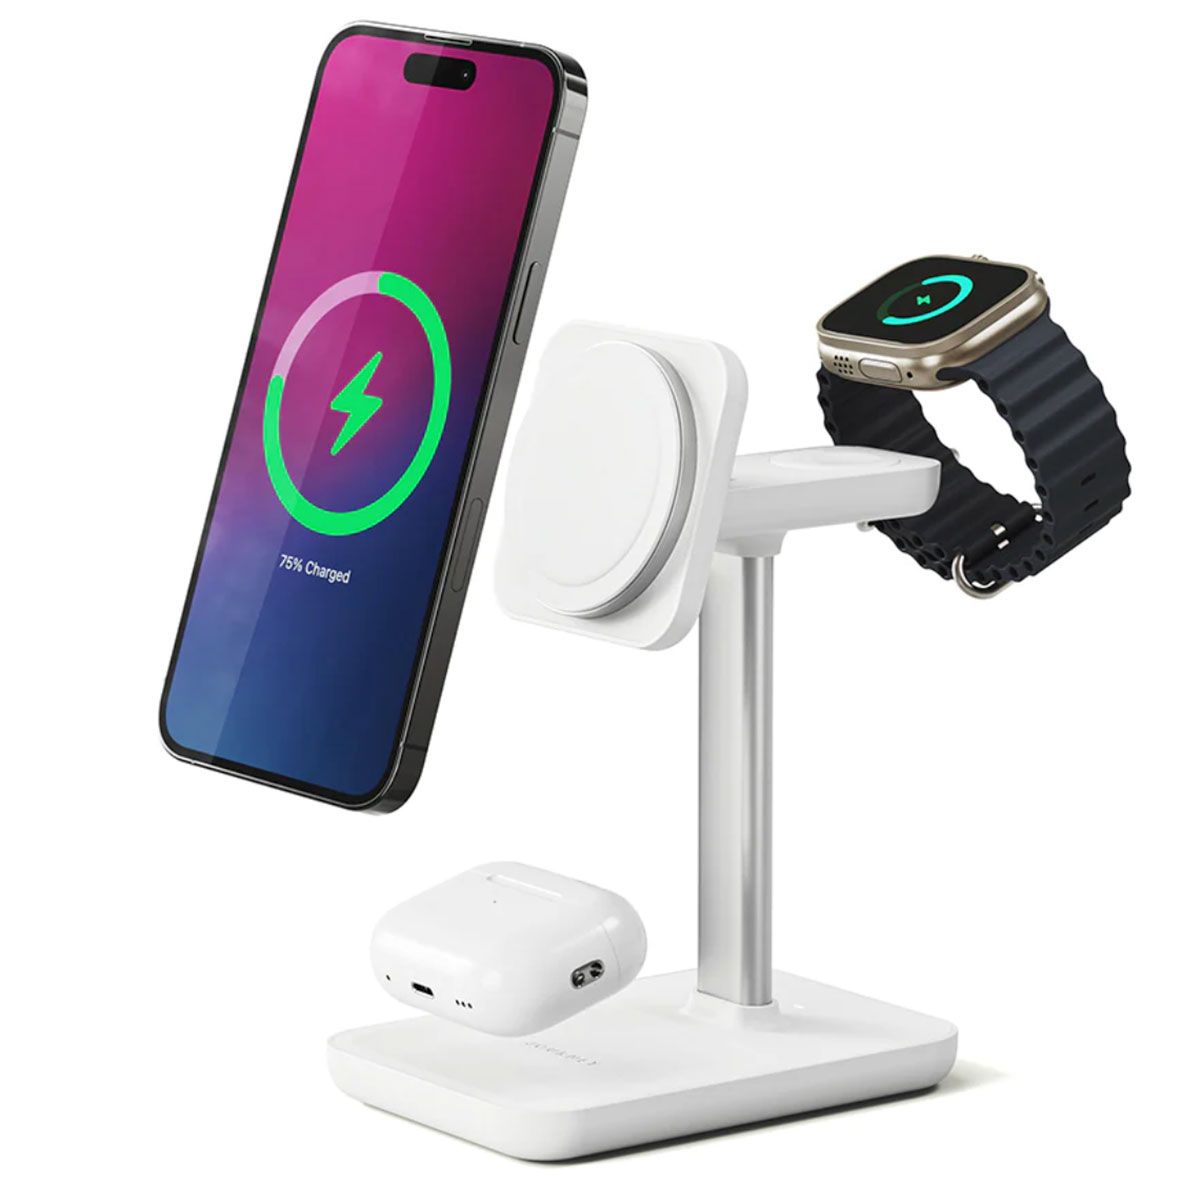 Journey Trio Ultra 3-in-1 Fast Wireless Charging Station – Fast 3-in-1 magnetic charger